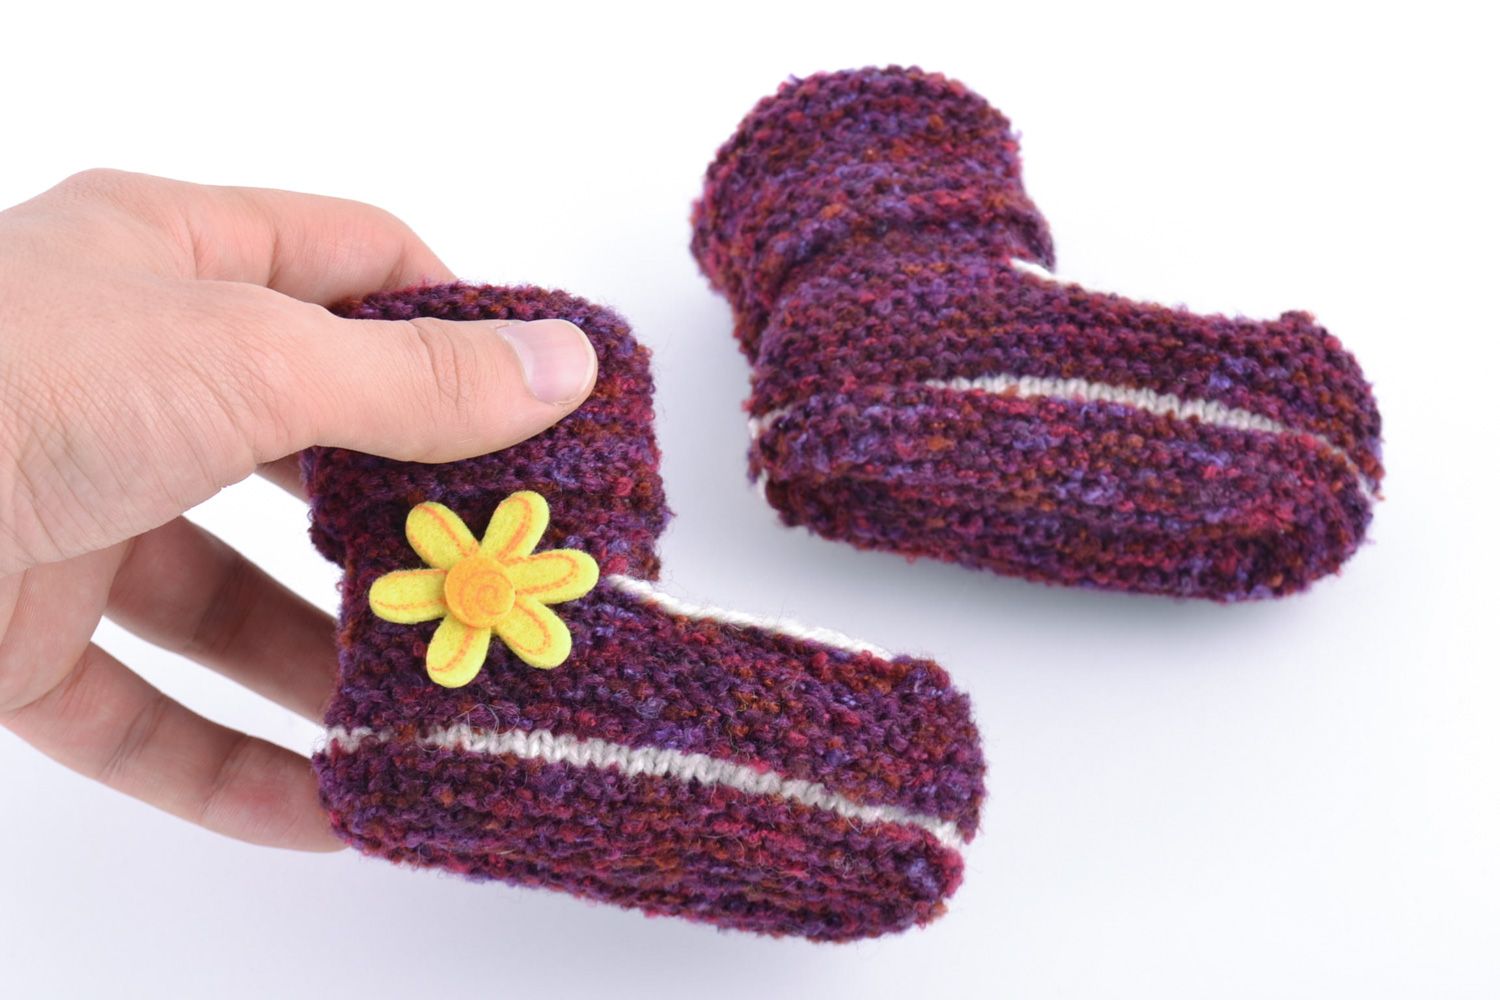 Handmade soft warm baby booties knitted of natural wool in white and violet colors photo 5